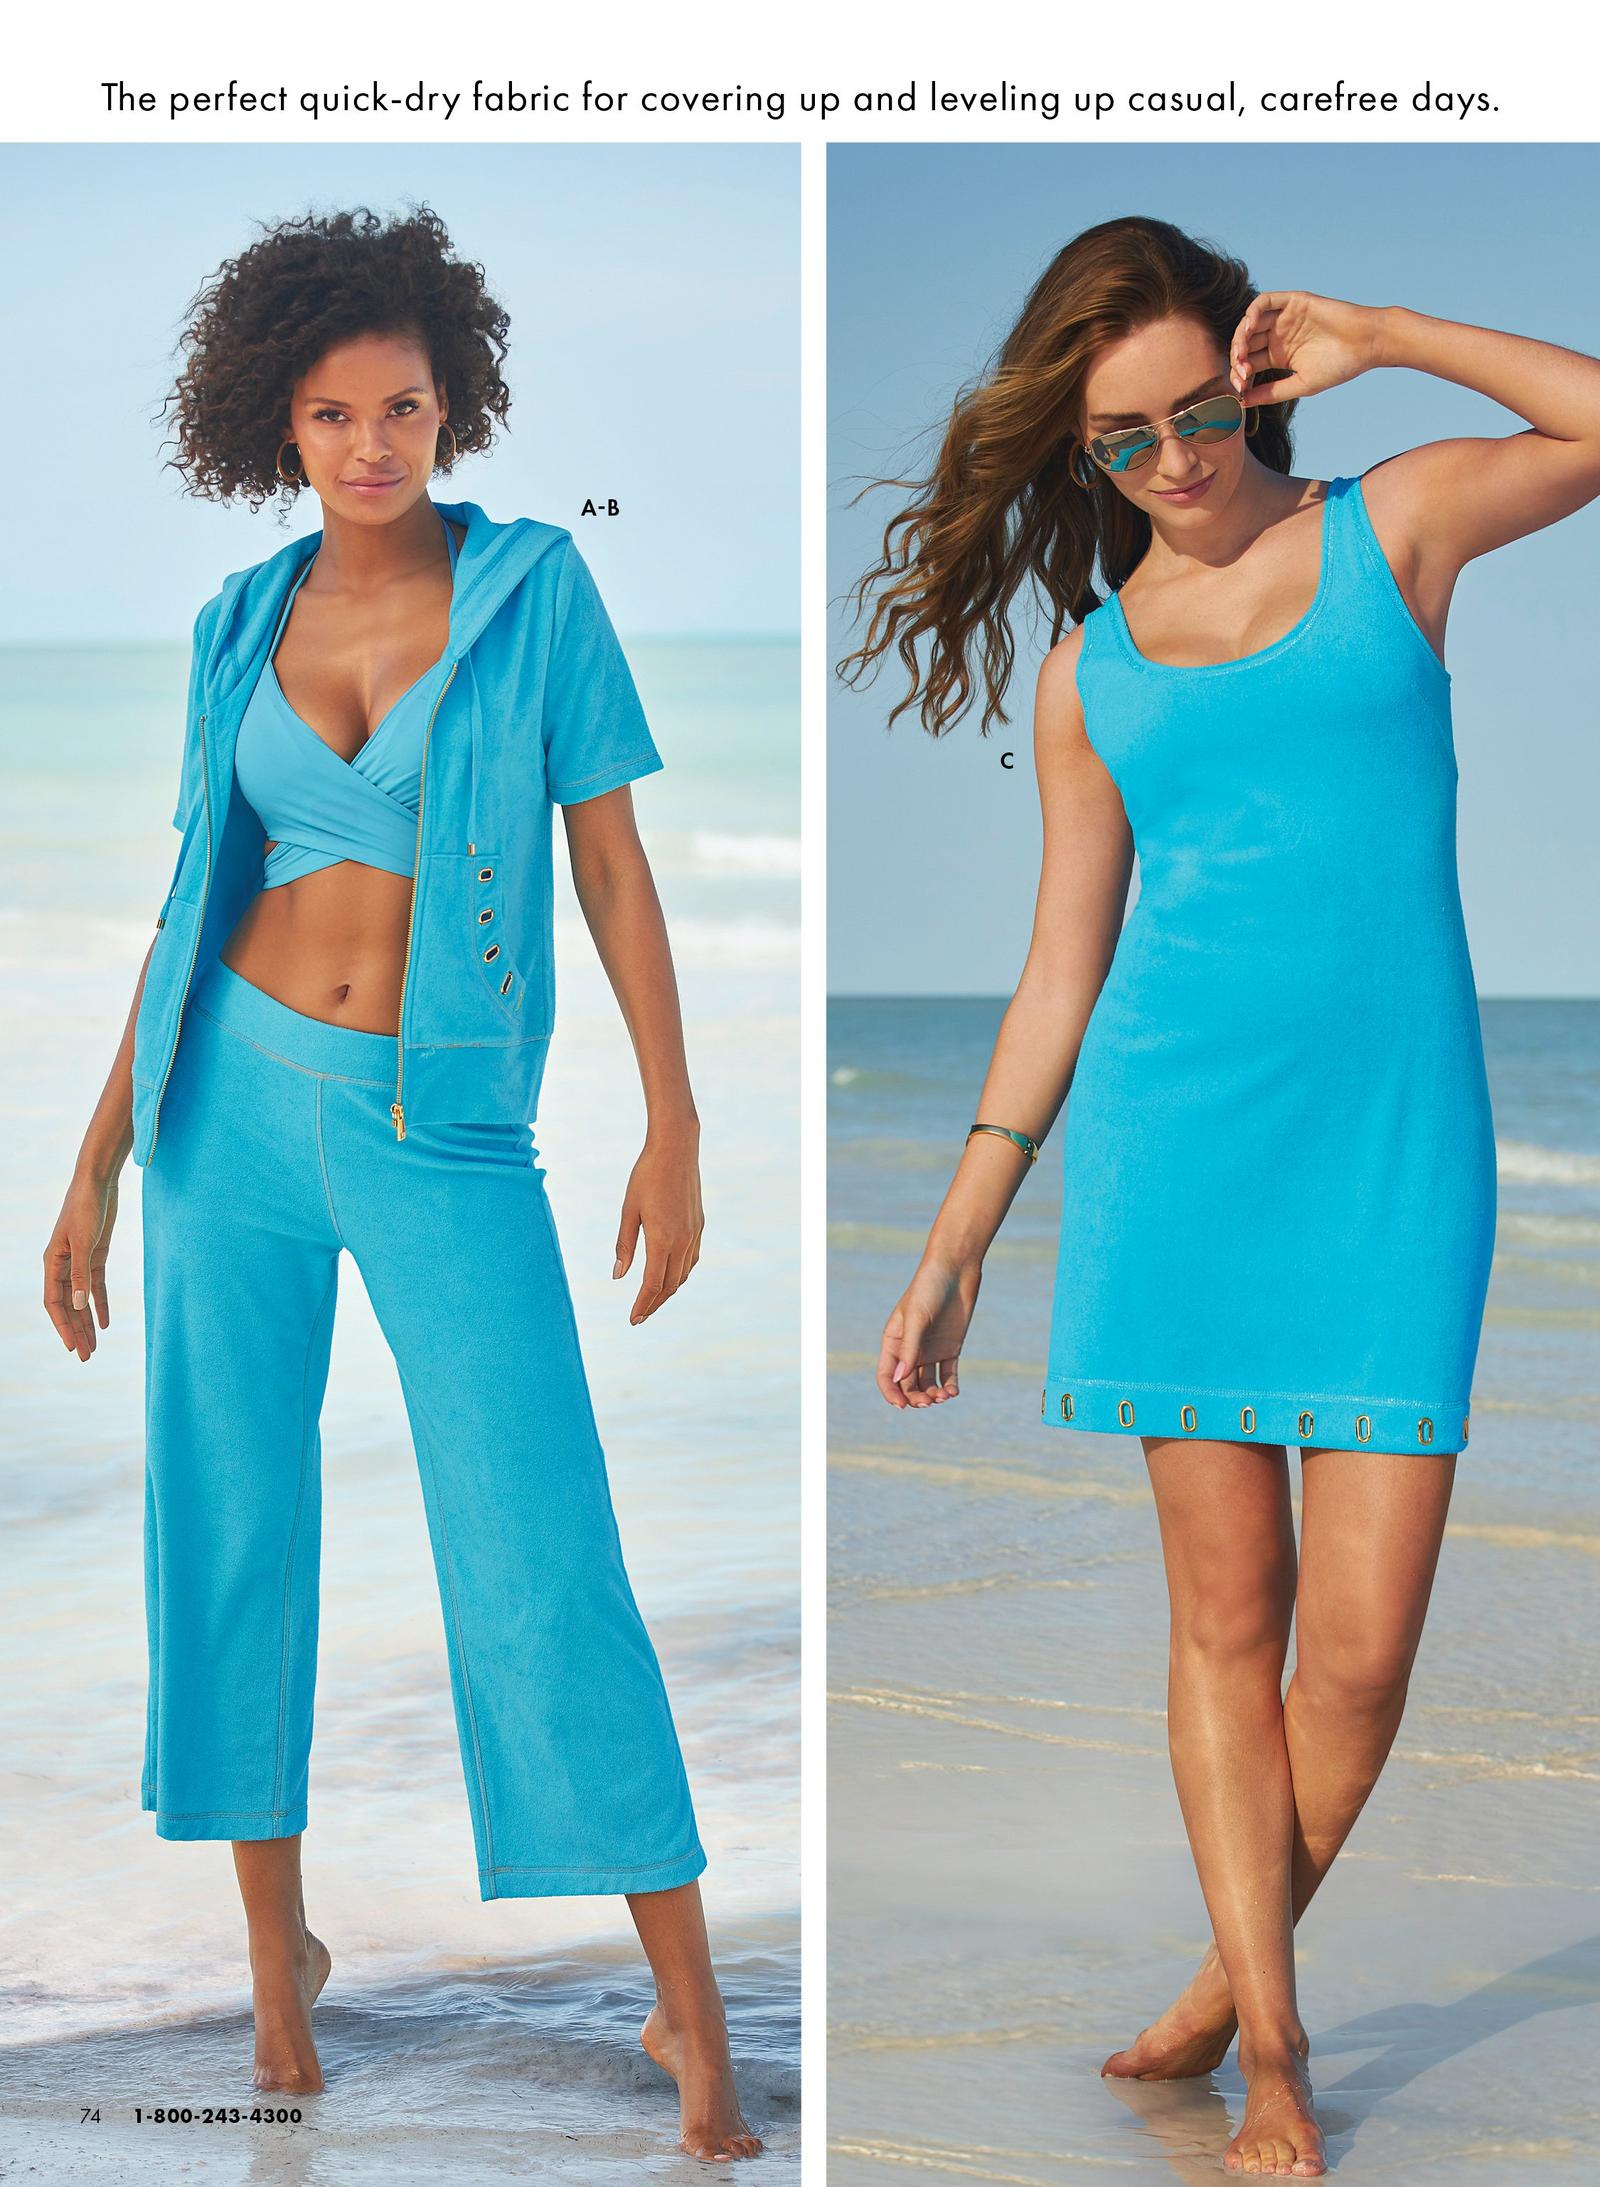 Model is wearing the Terry Grommet Short-Sleeve Warm-Up Set in bright blue with a drawstring and grommet details on the pocket and the Swim Sense Underwire Wrap Bikini Top in bright blue.